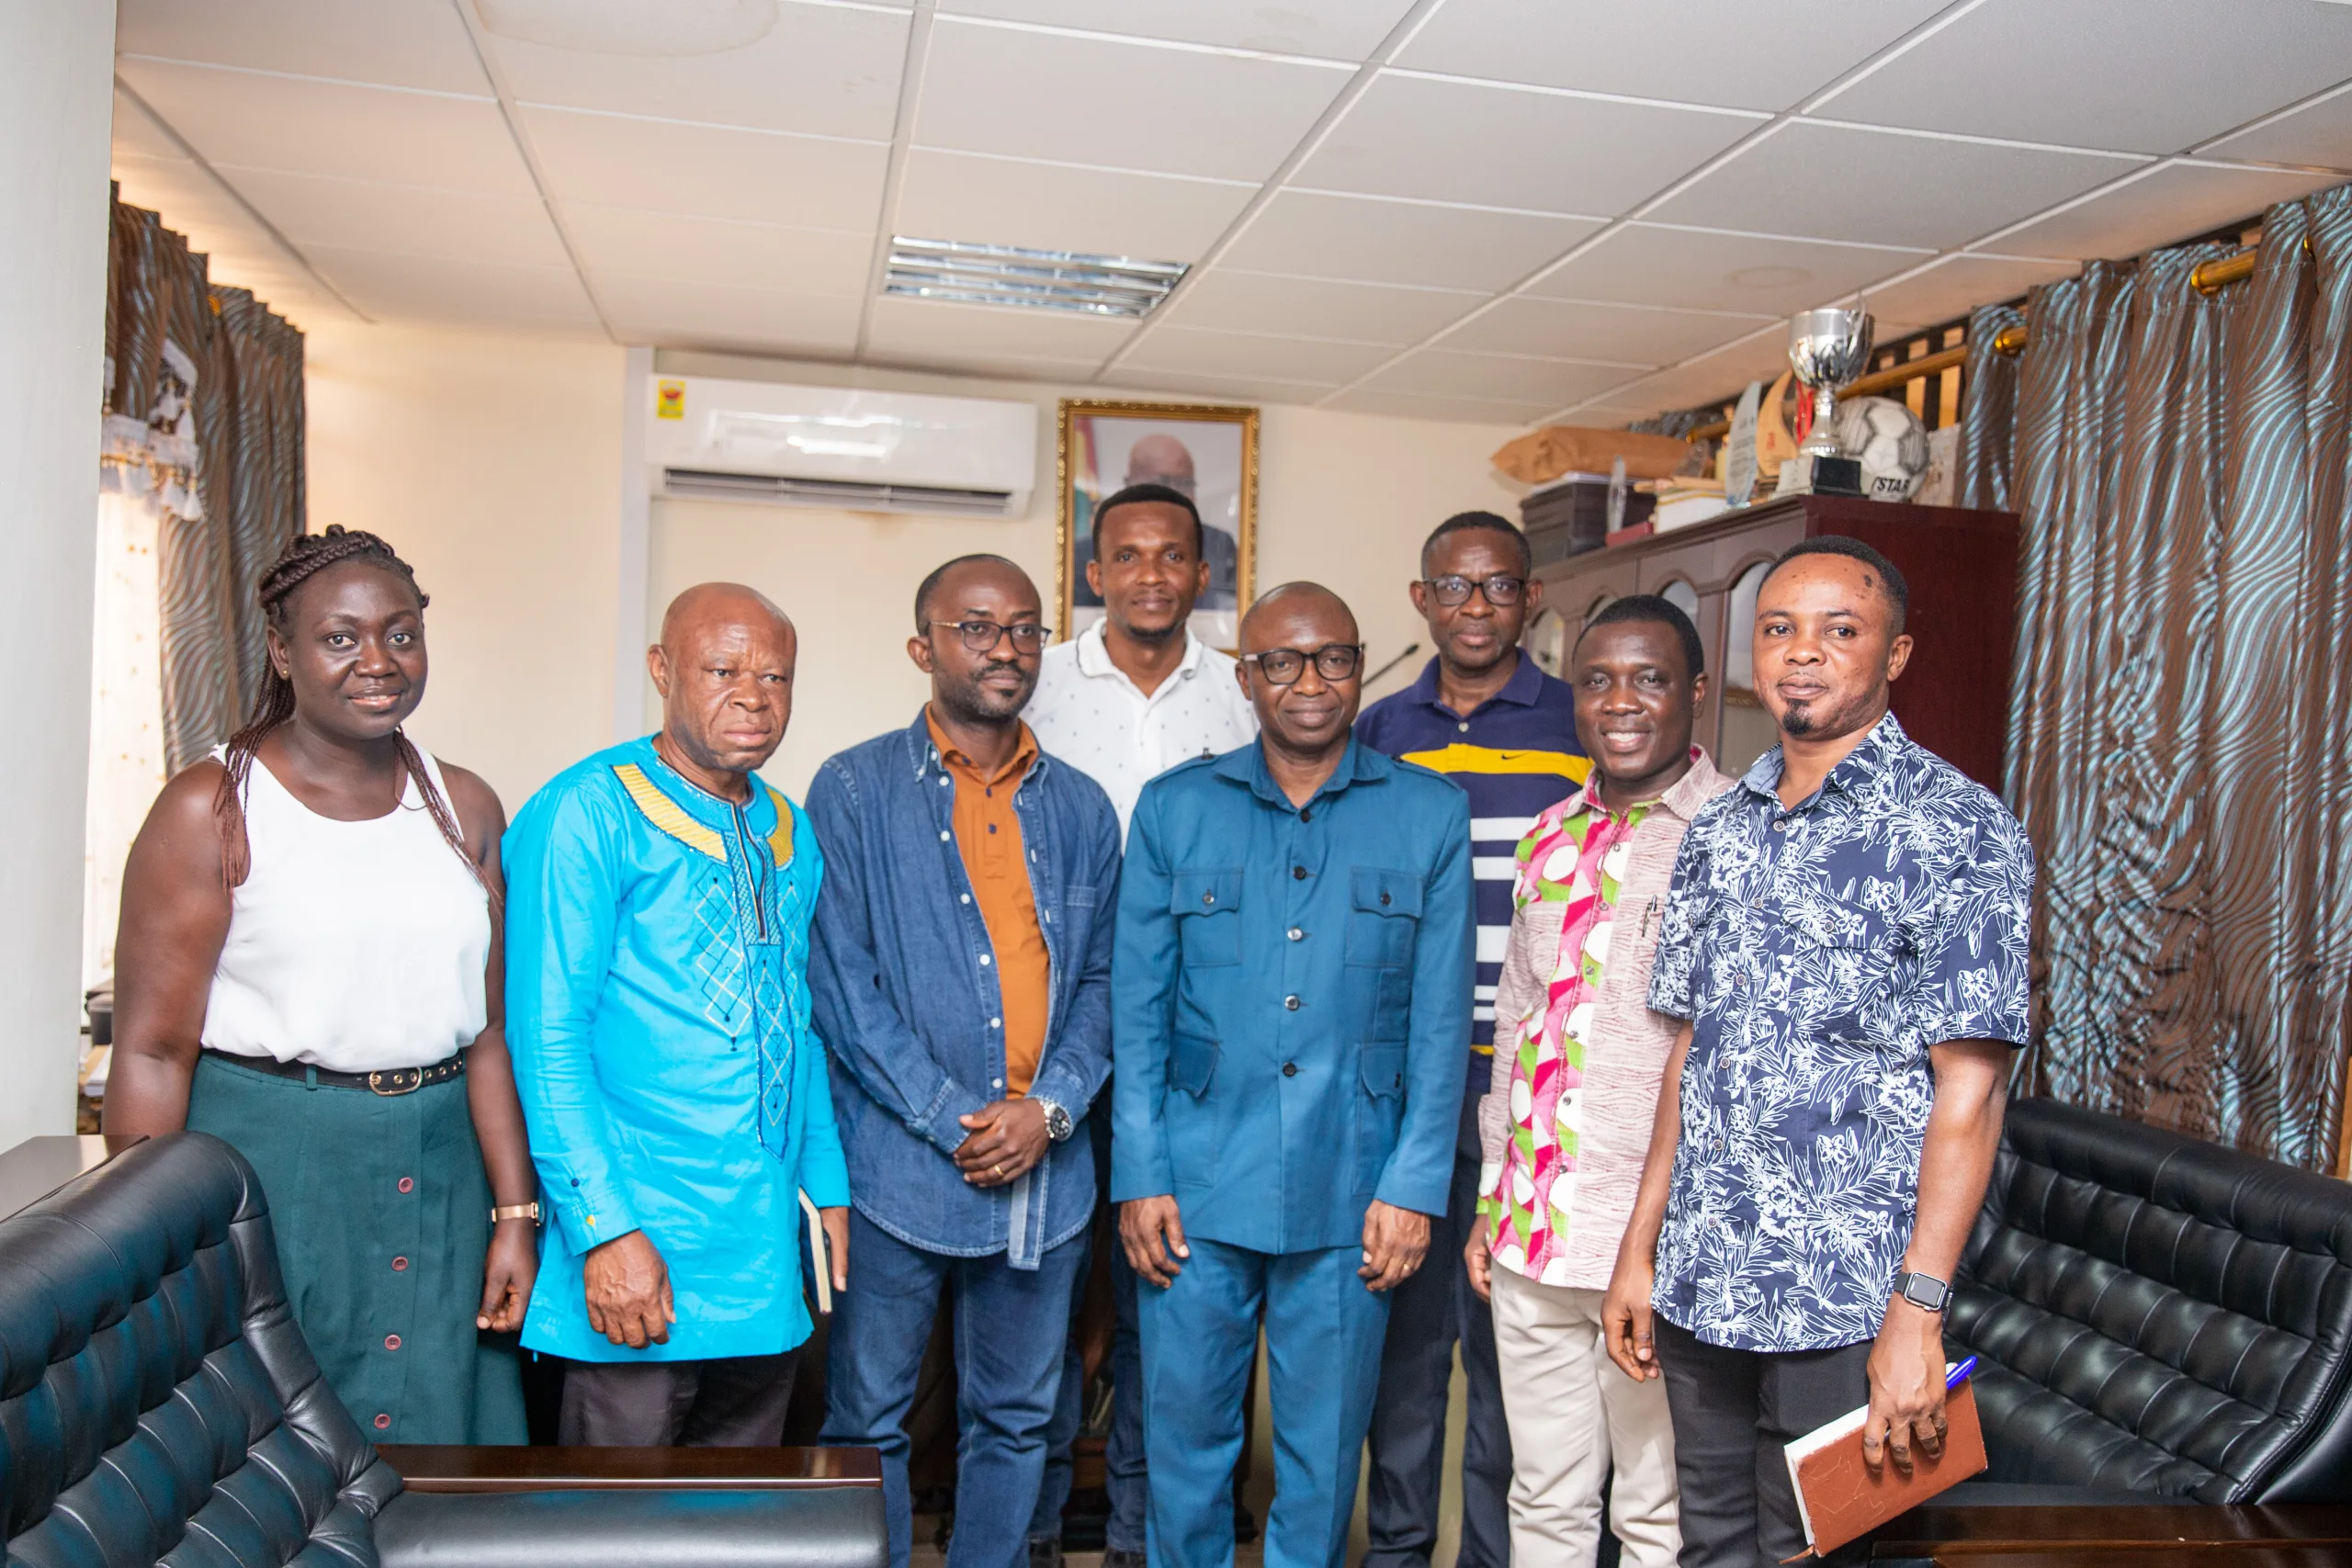 Vice-Chancellor Calls for Partnership with Fisheries Commission to Build Inland Economy, University of Energy and Natural Resources - Sunyani